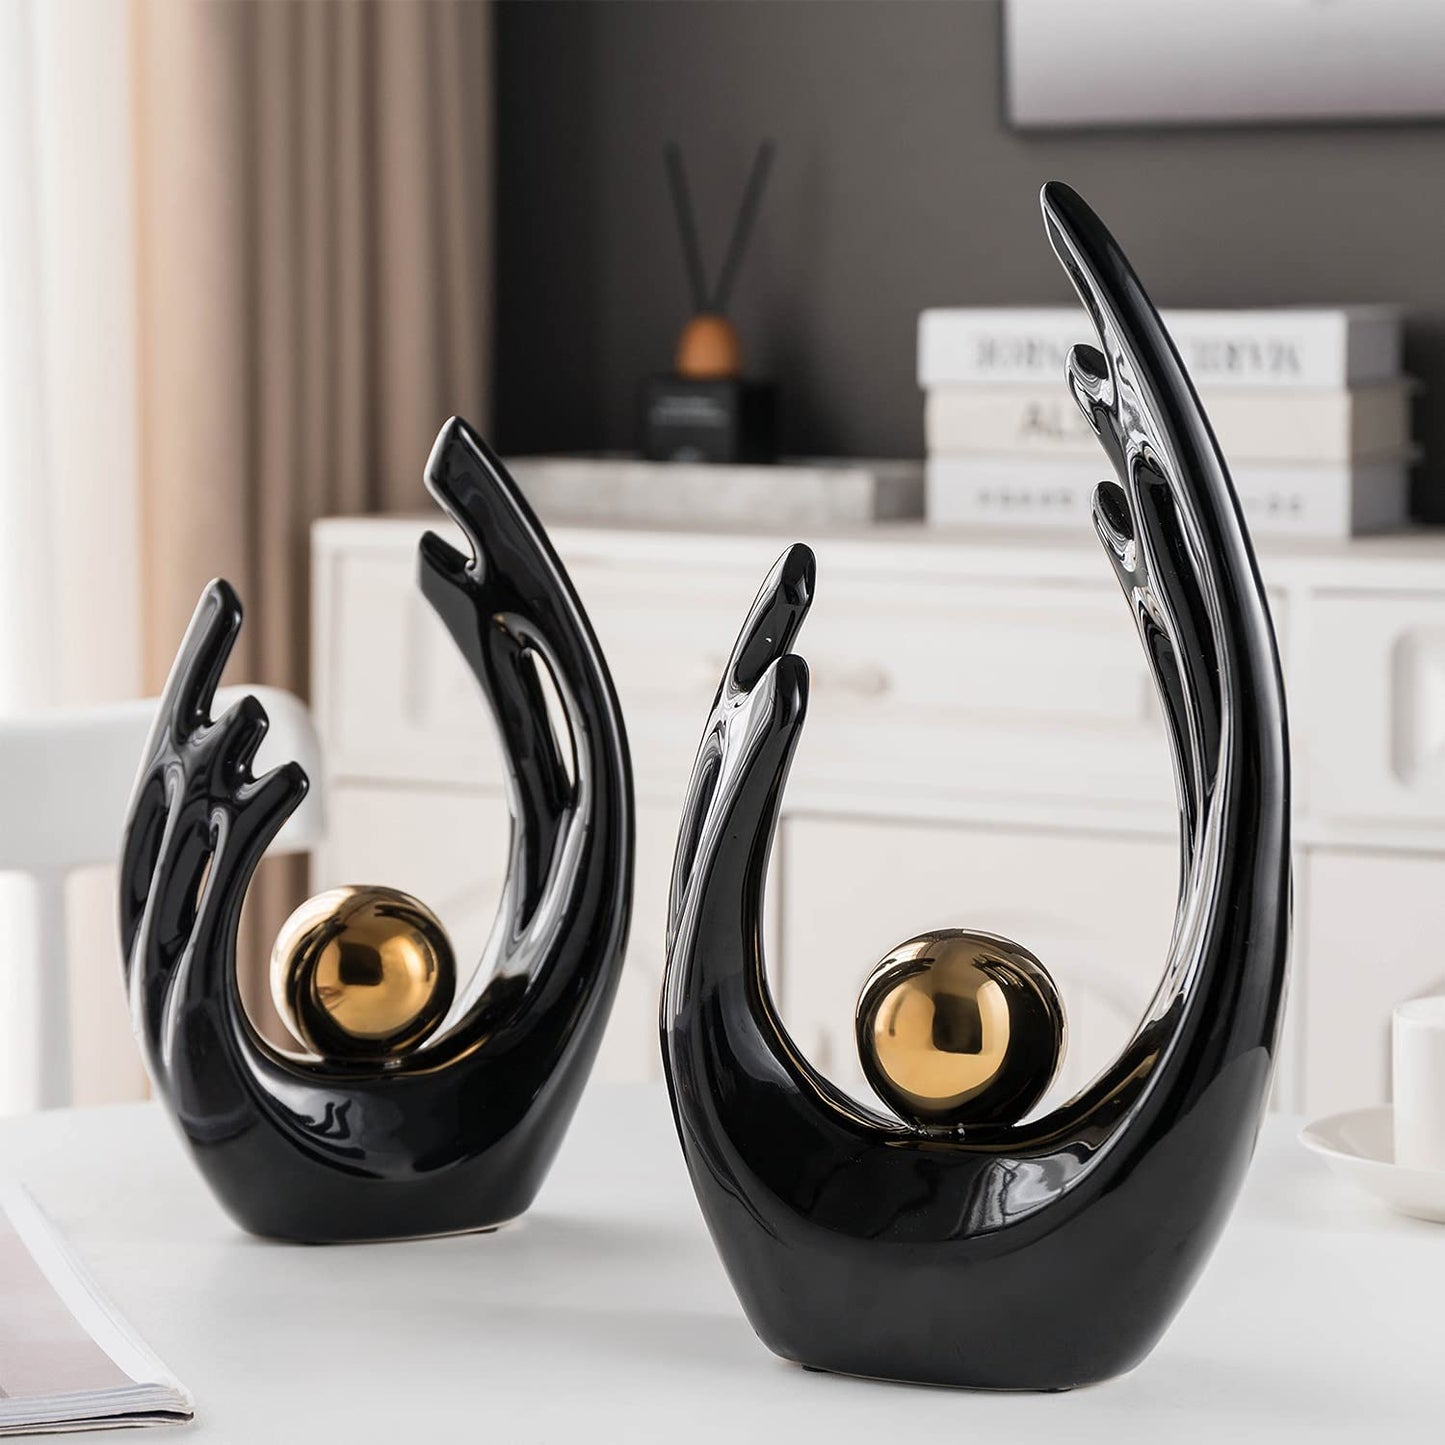 "Contemporary Ceramic Statues: Stylish Home Decor Accents for Living Room, Office, and More!"